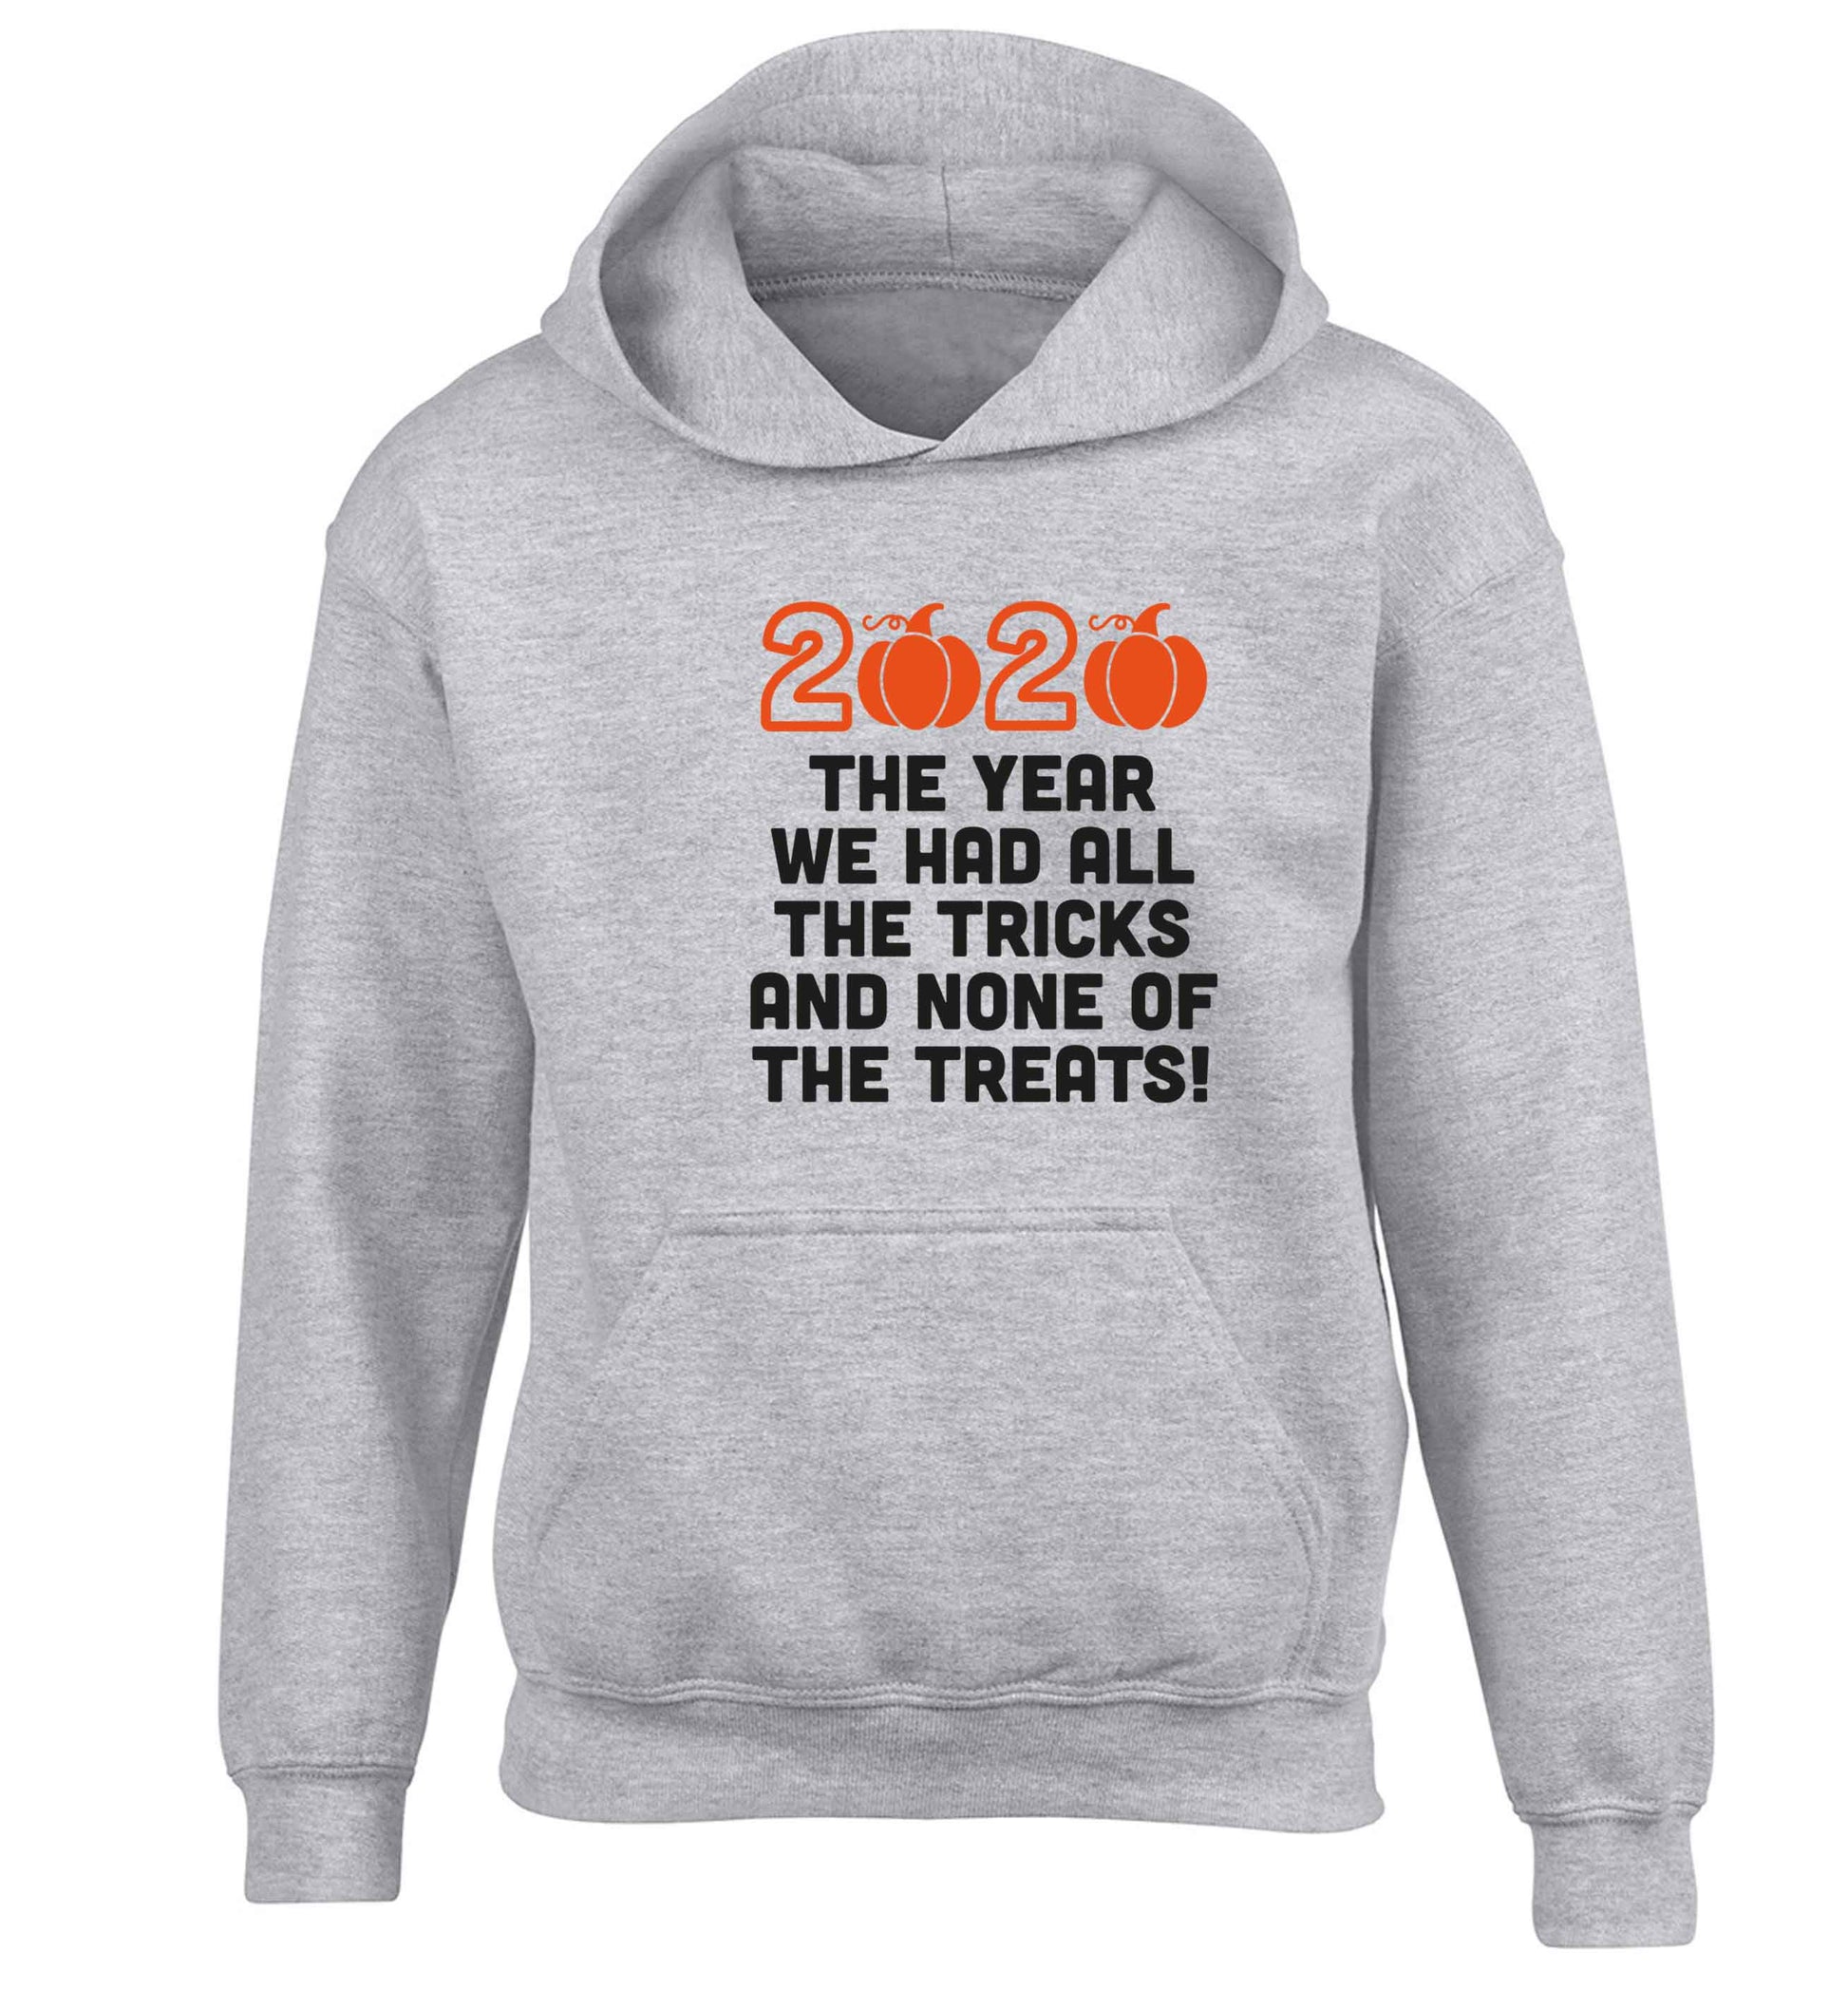 2020 The year we had all of the tricks and none of the treats children's grey hoodie 12-13 Years